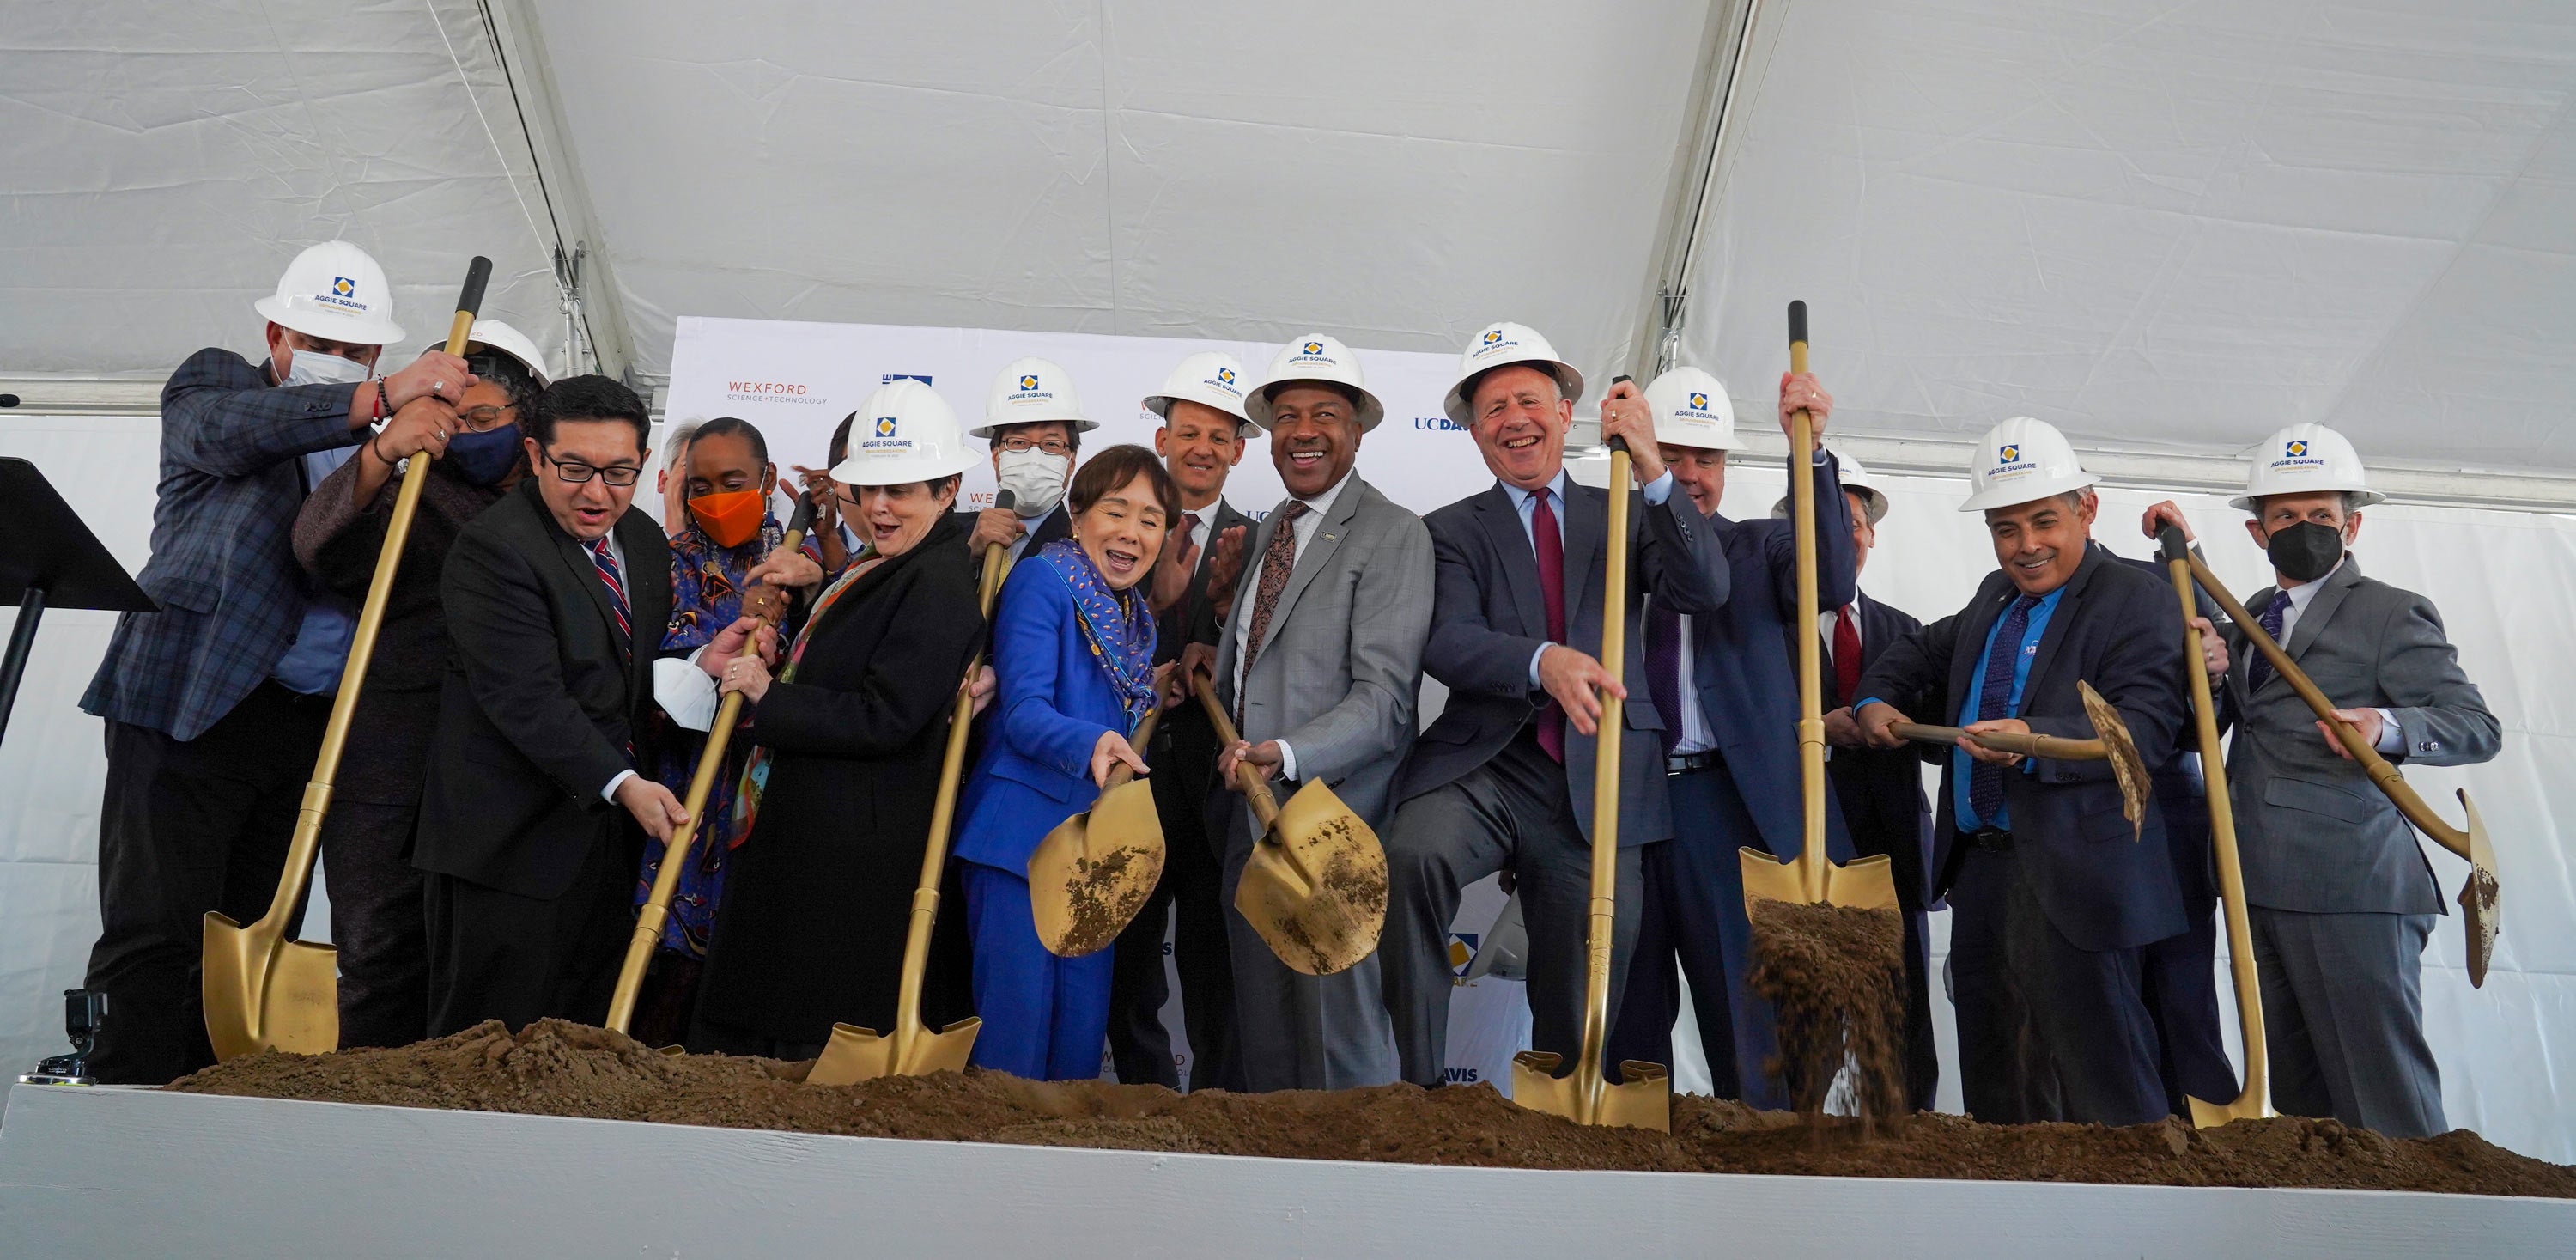 for ceremoniaLong line of executives in hard hats and wielding gold shovels l groundbreaking